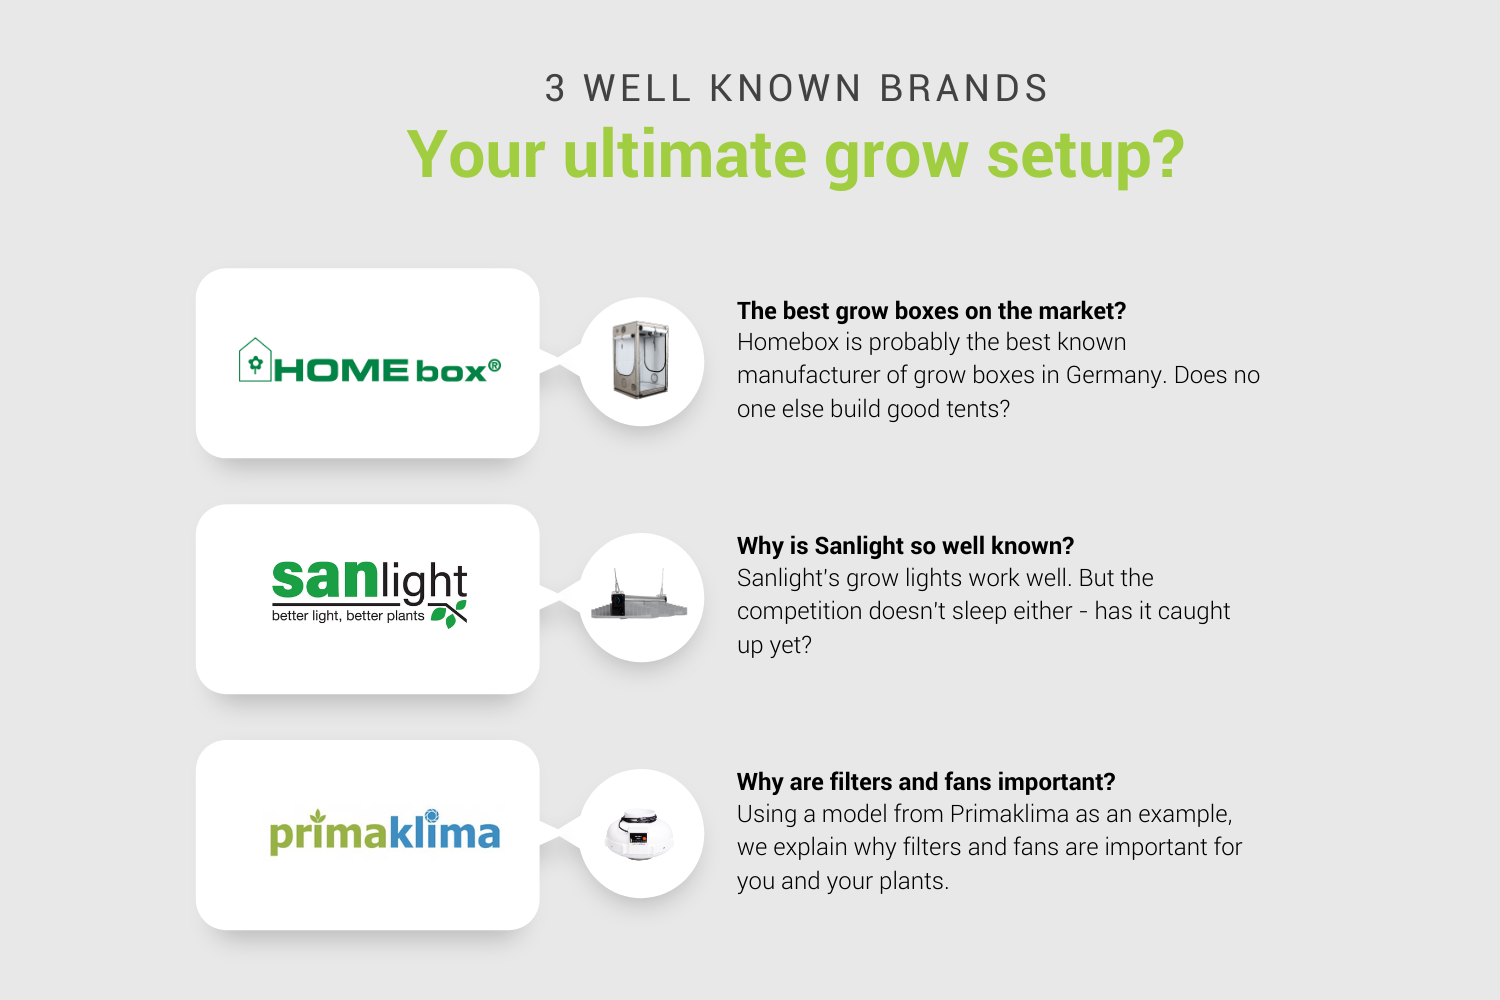 Homebox, Sanlight and Primaklima – ultimate brands for maximum yield?